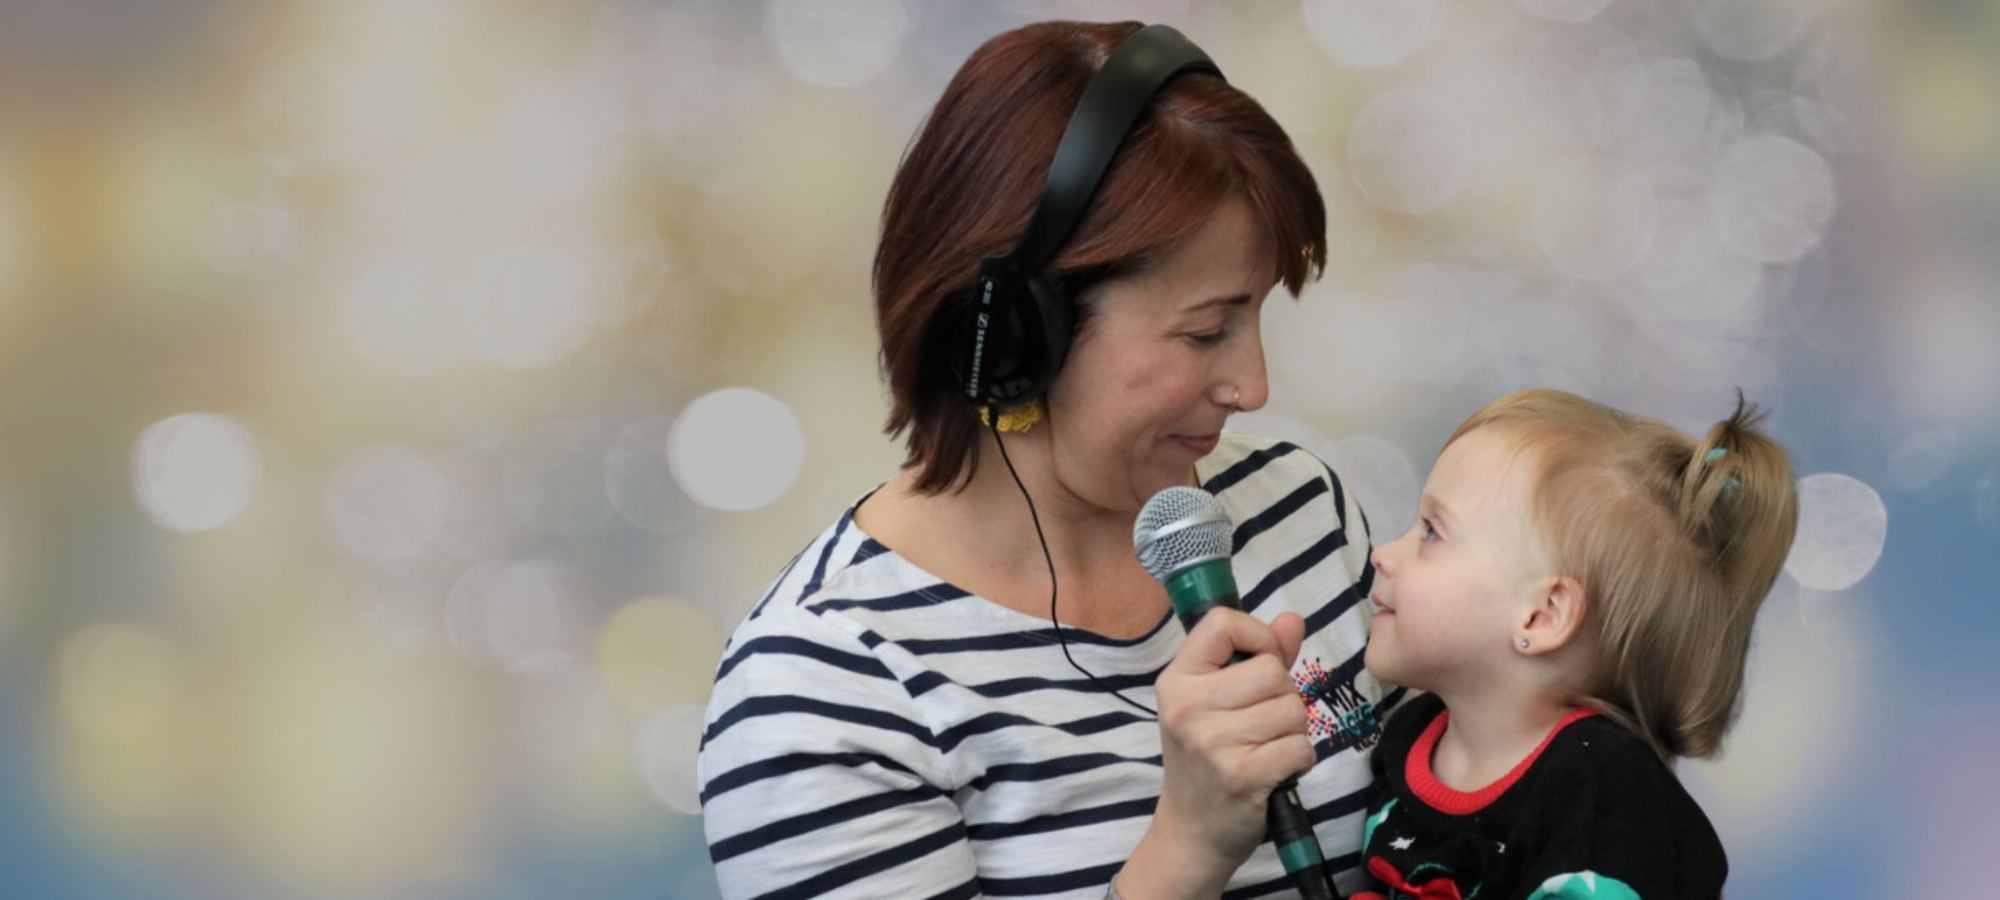 A woman wearing headphones and holding a microphone looks down at a small young child